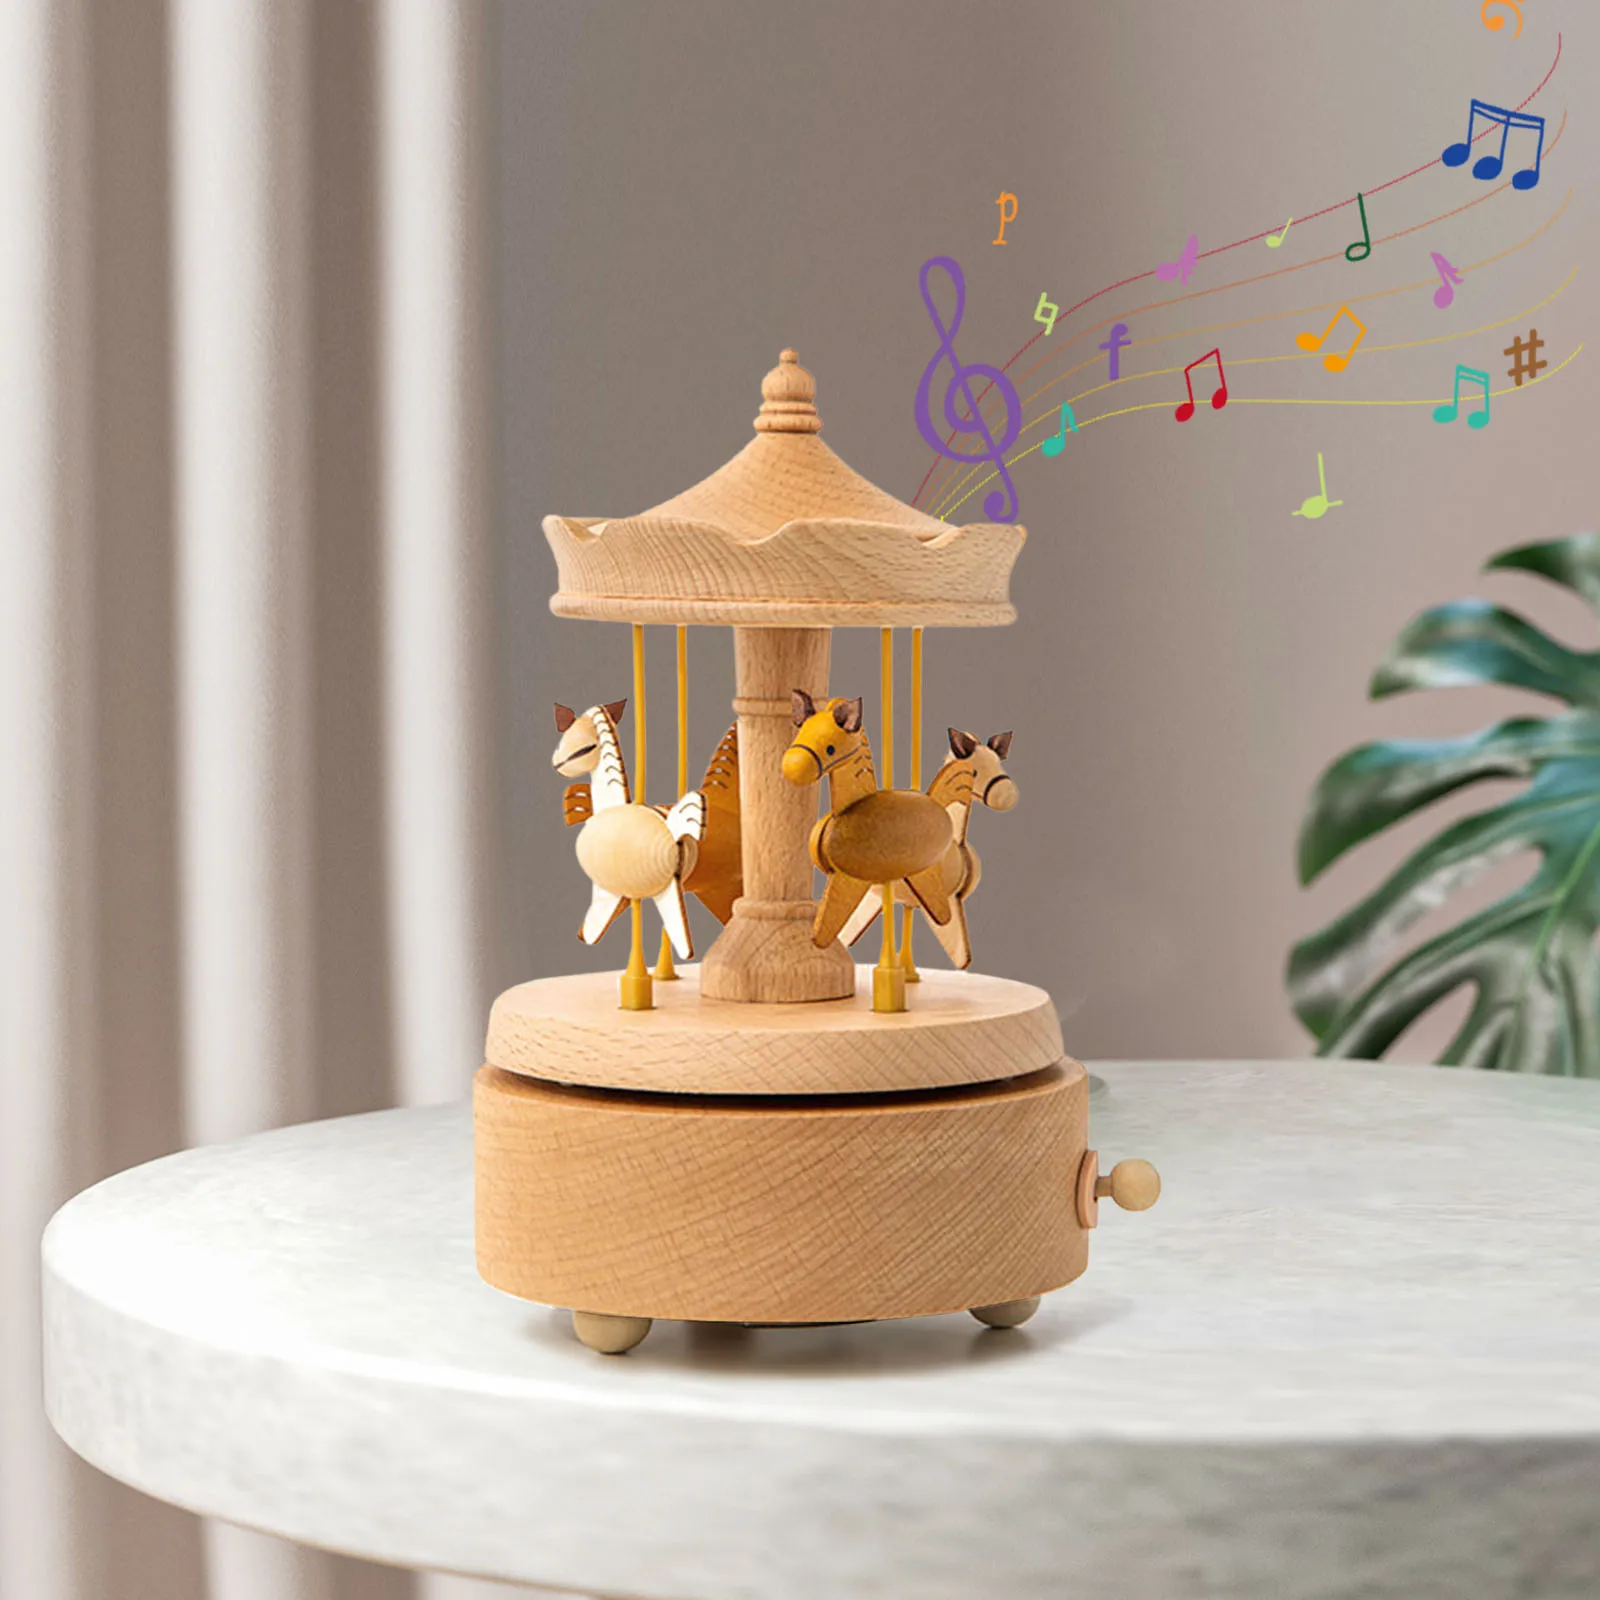 

Rosiking Wooden merry-go-round music box home furnishings ♫ Castle in the Sky ♫ For Friends Children Christmas Birthday Gifts